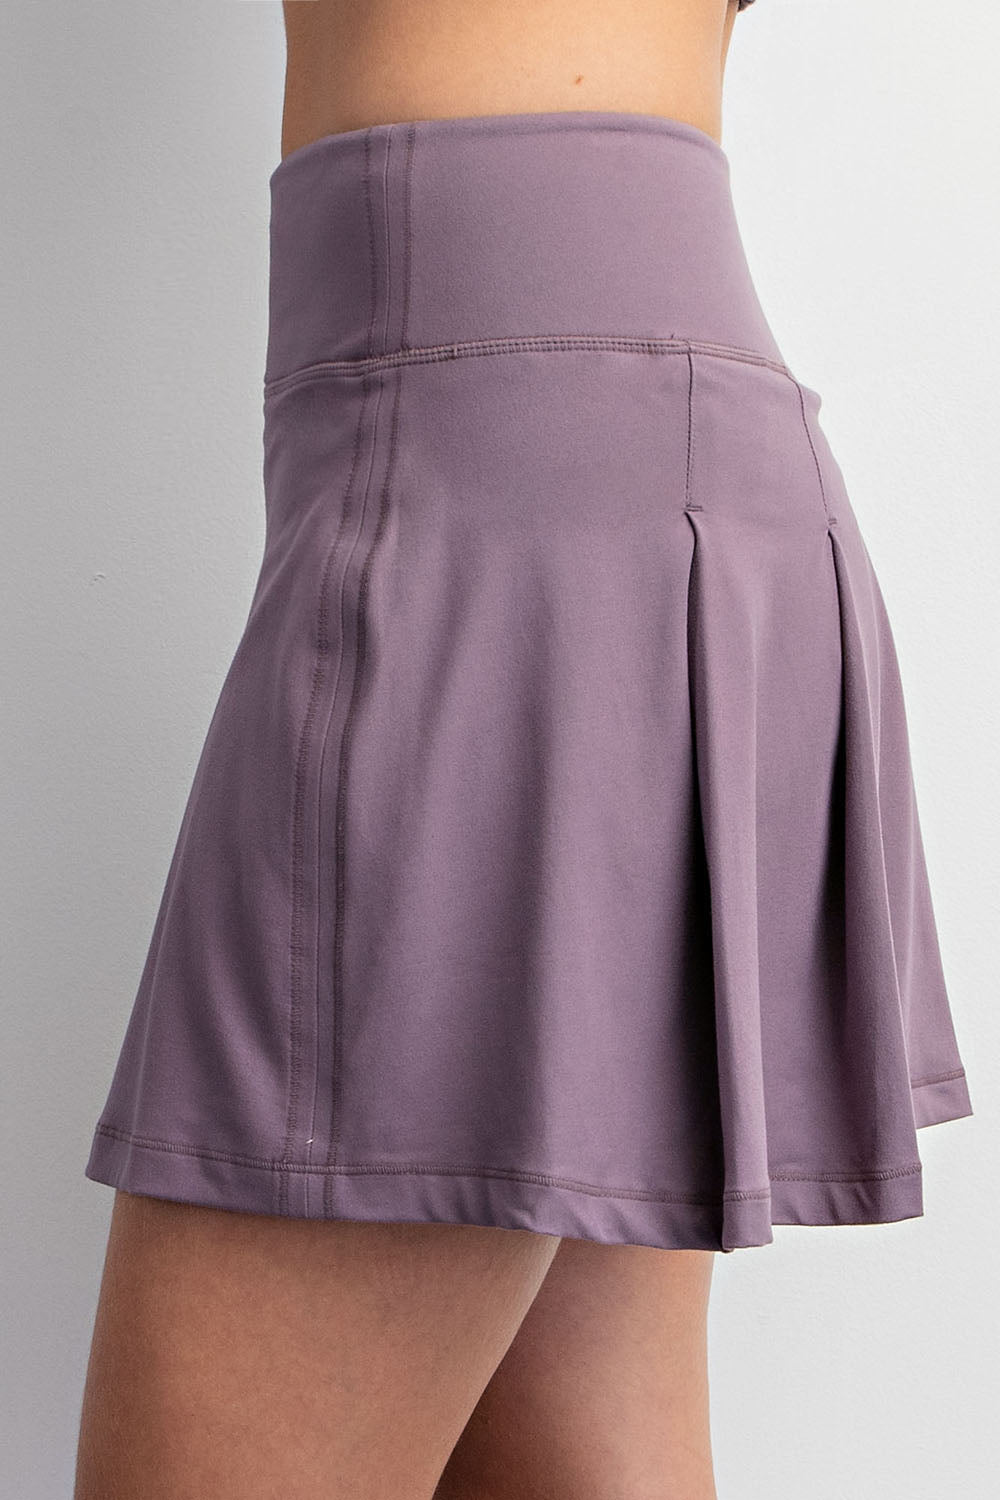 Frosted Mulberry Butter Soft High Waist Skater Skort (Built in Shorts with Pockets)